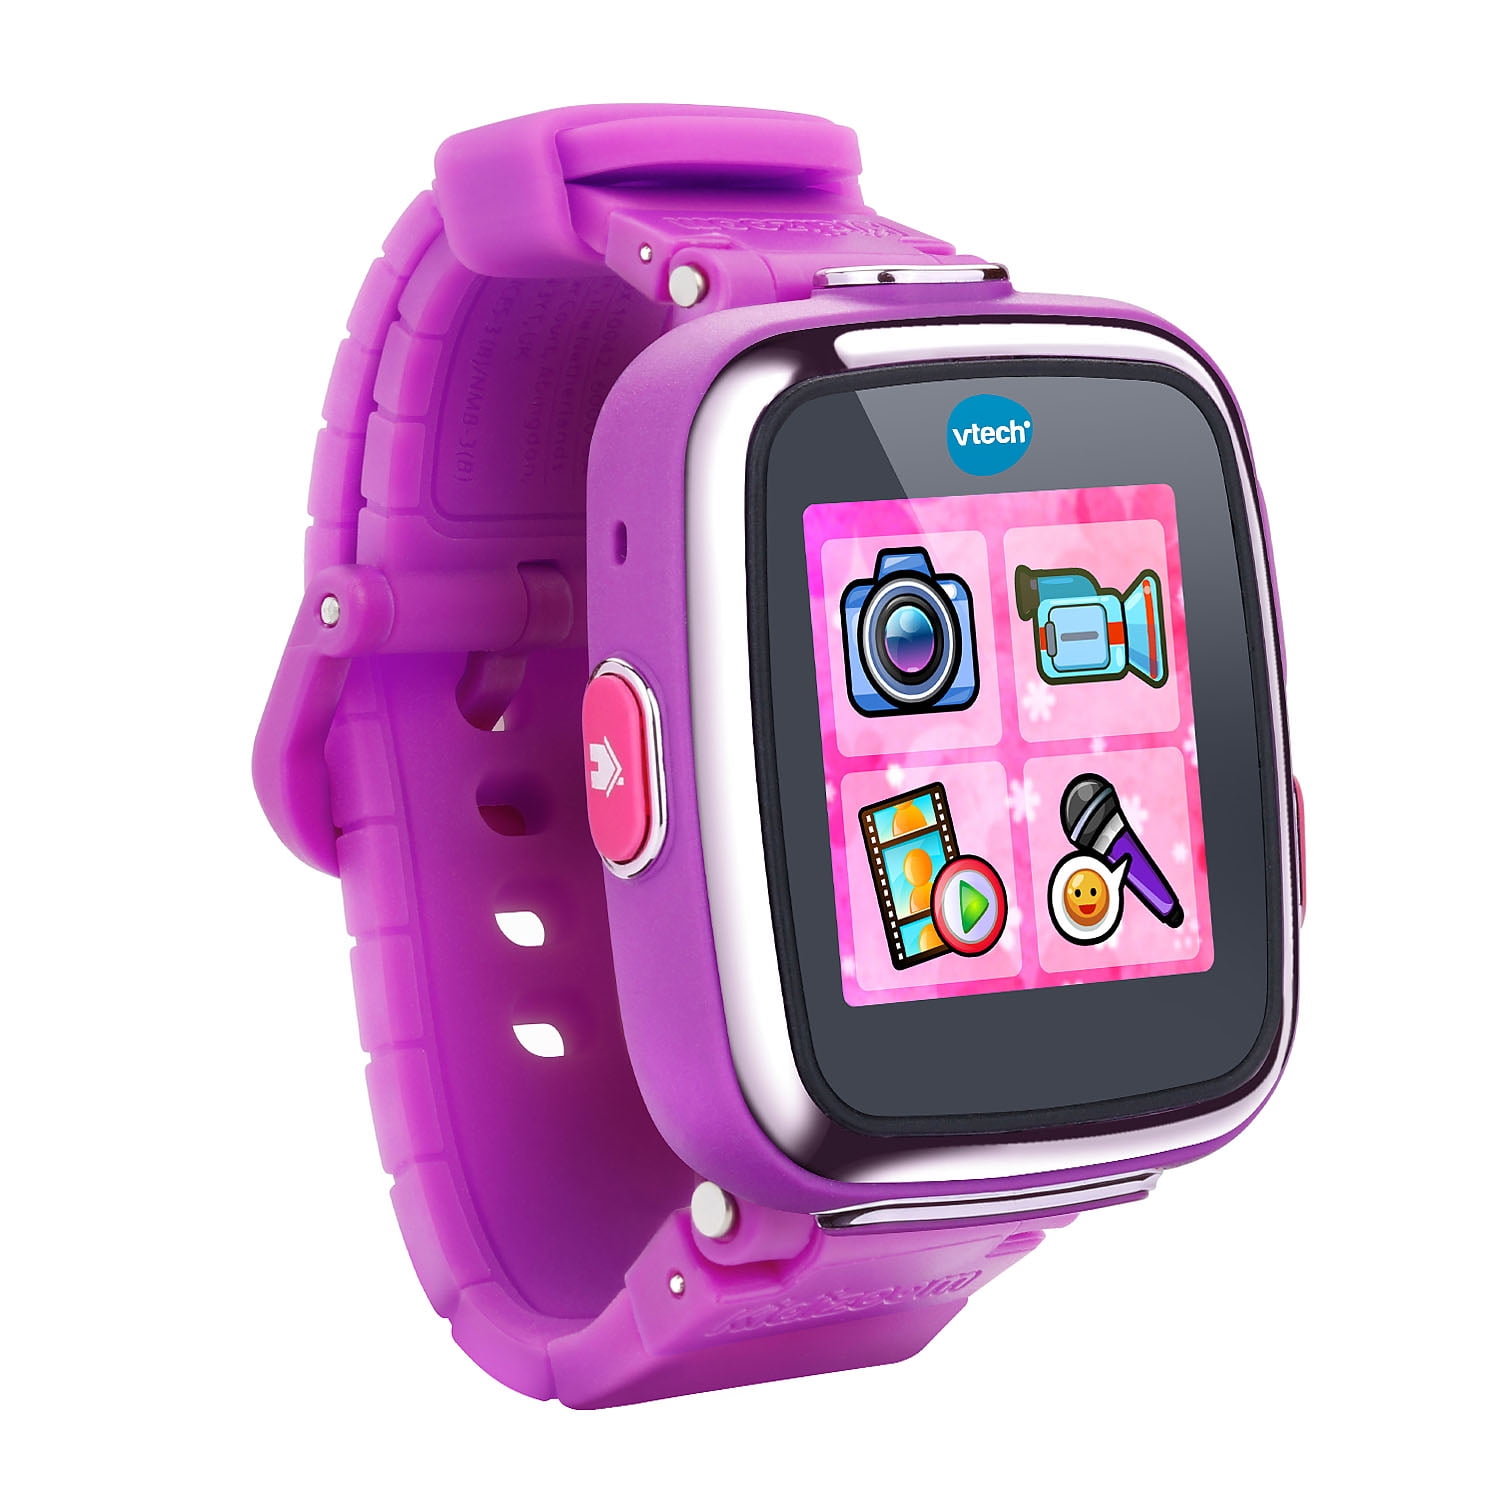 I Test-Drove the Vtech Kidizoom Smartwatch DX2 for kids... My Findings -  Threadcurve